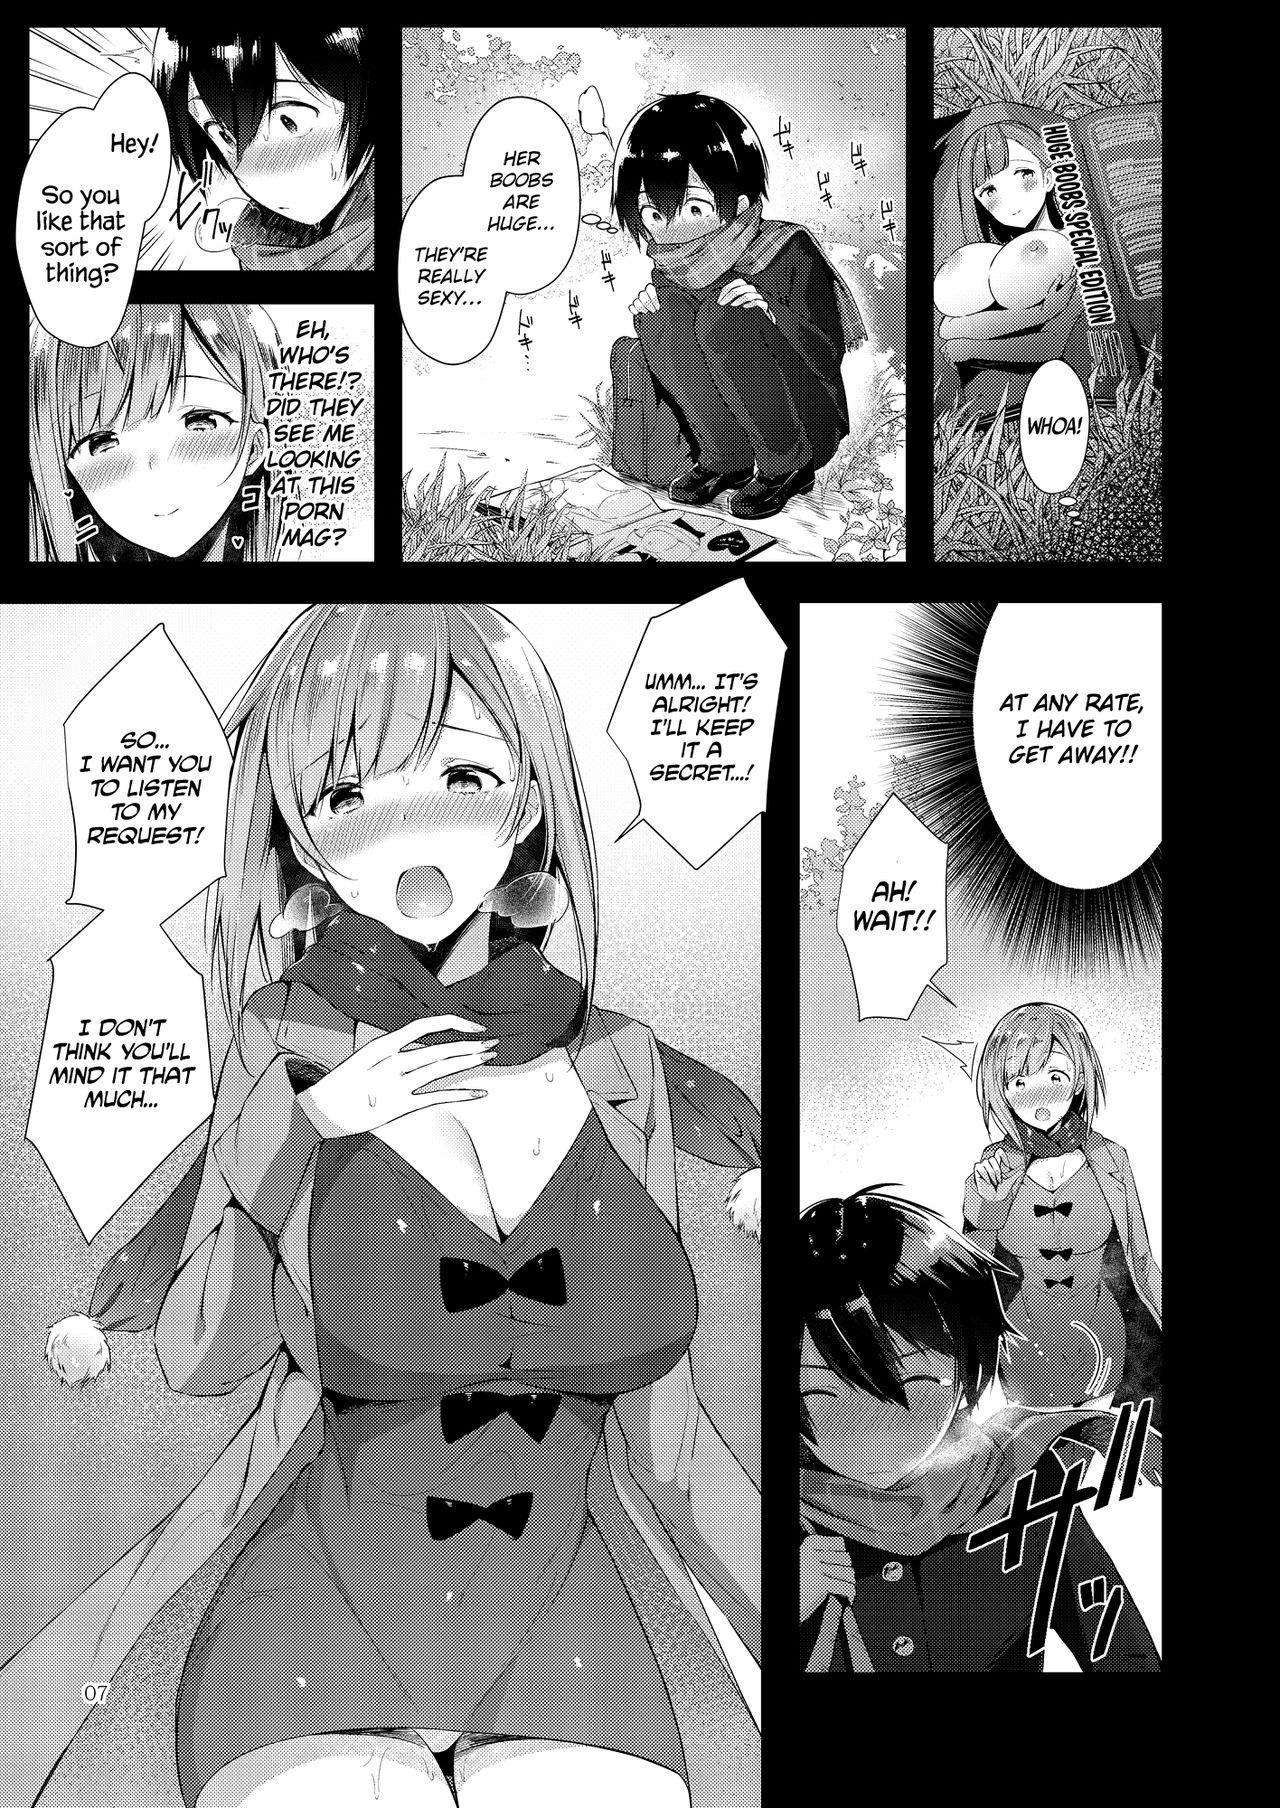 Con Amatoro Oppai | Sweet n’ Sticky Boobs ♥ Chica - Page 6